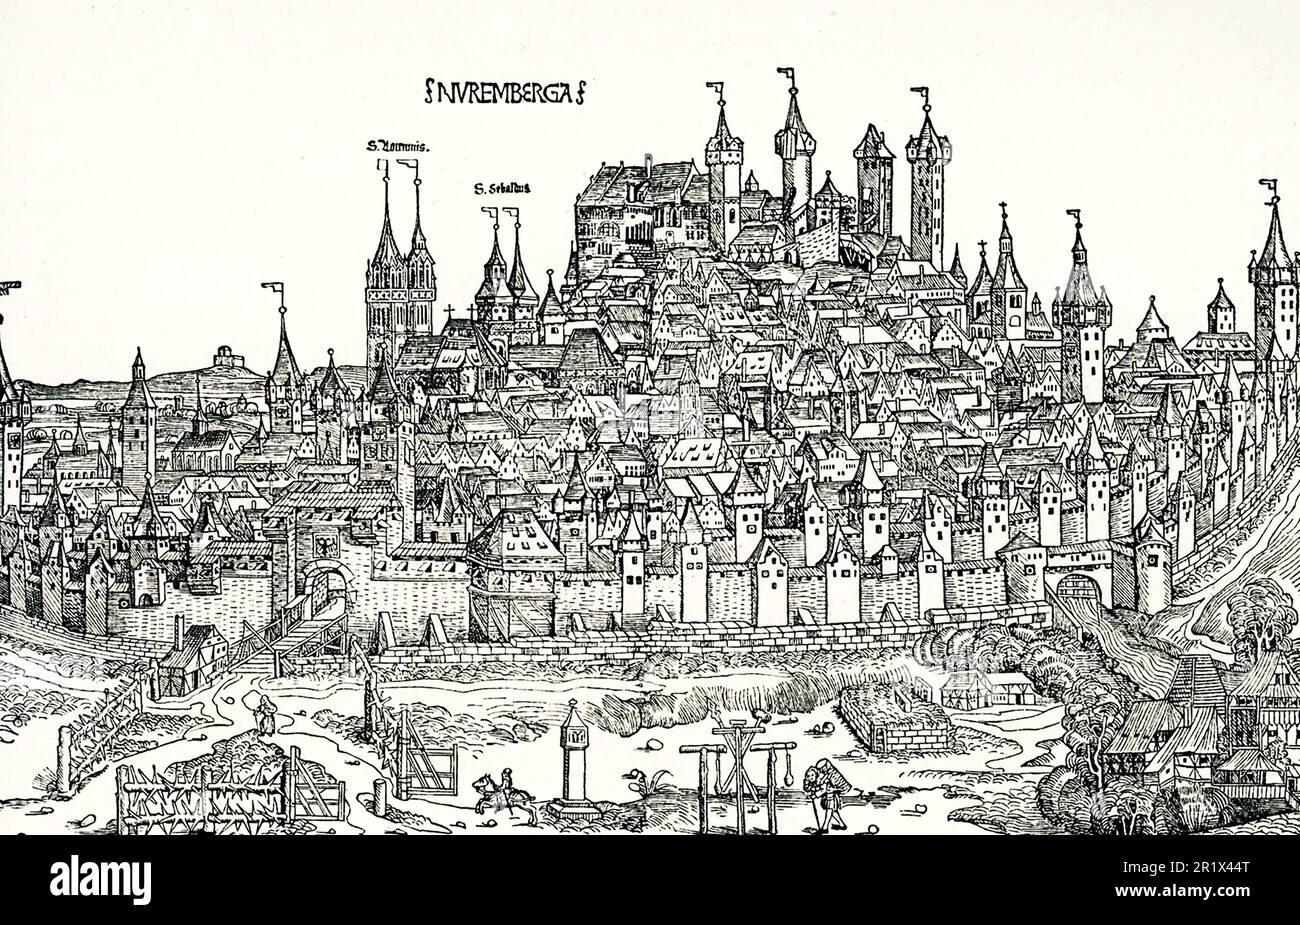 The 1906 caption reads: 'View of City of Nuremberg in the 15th century. from Hartmann Schedel's Chronicle of the world.' Hartmann Schedel (1440 –1514) was a German historian, physician, humanist, and one of the first cartographers to use the printing press. He wrote the Chronicle in 1493. Stock Photo